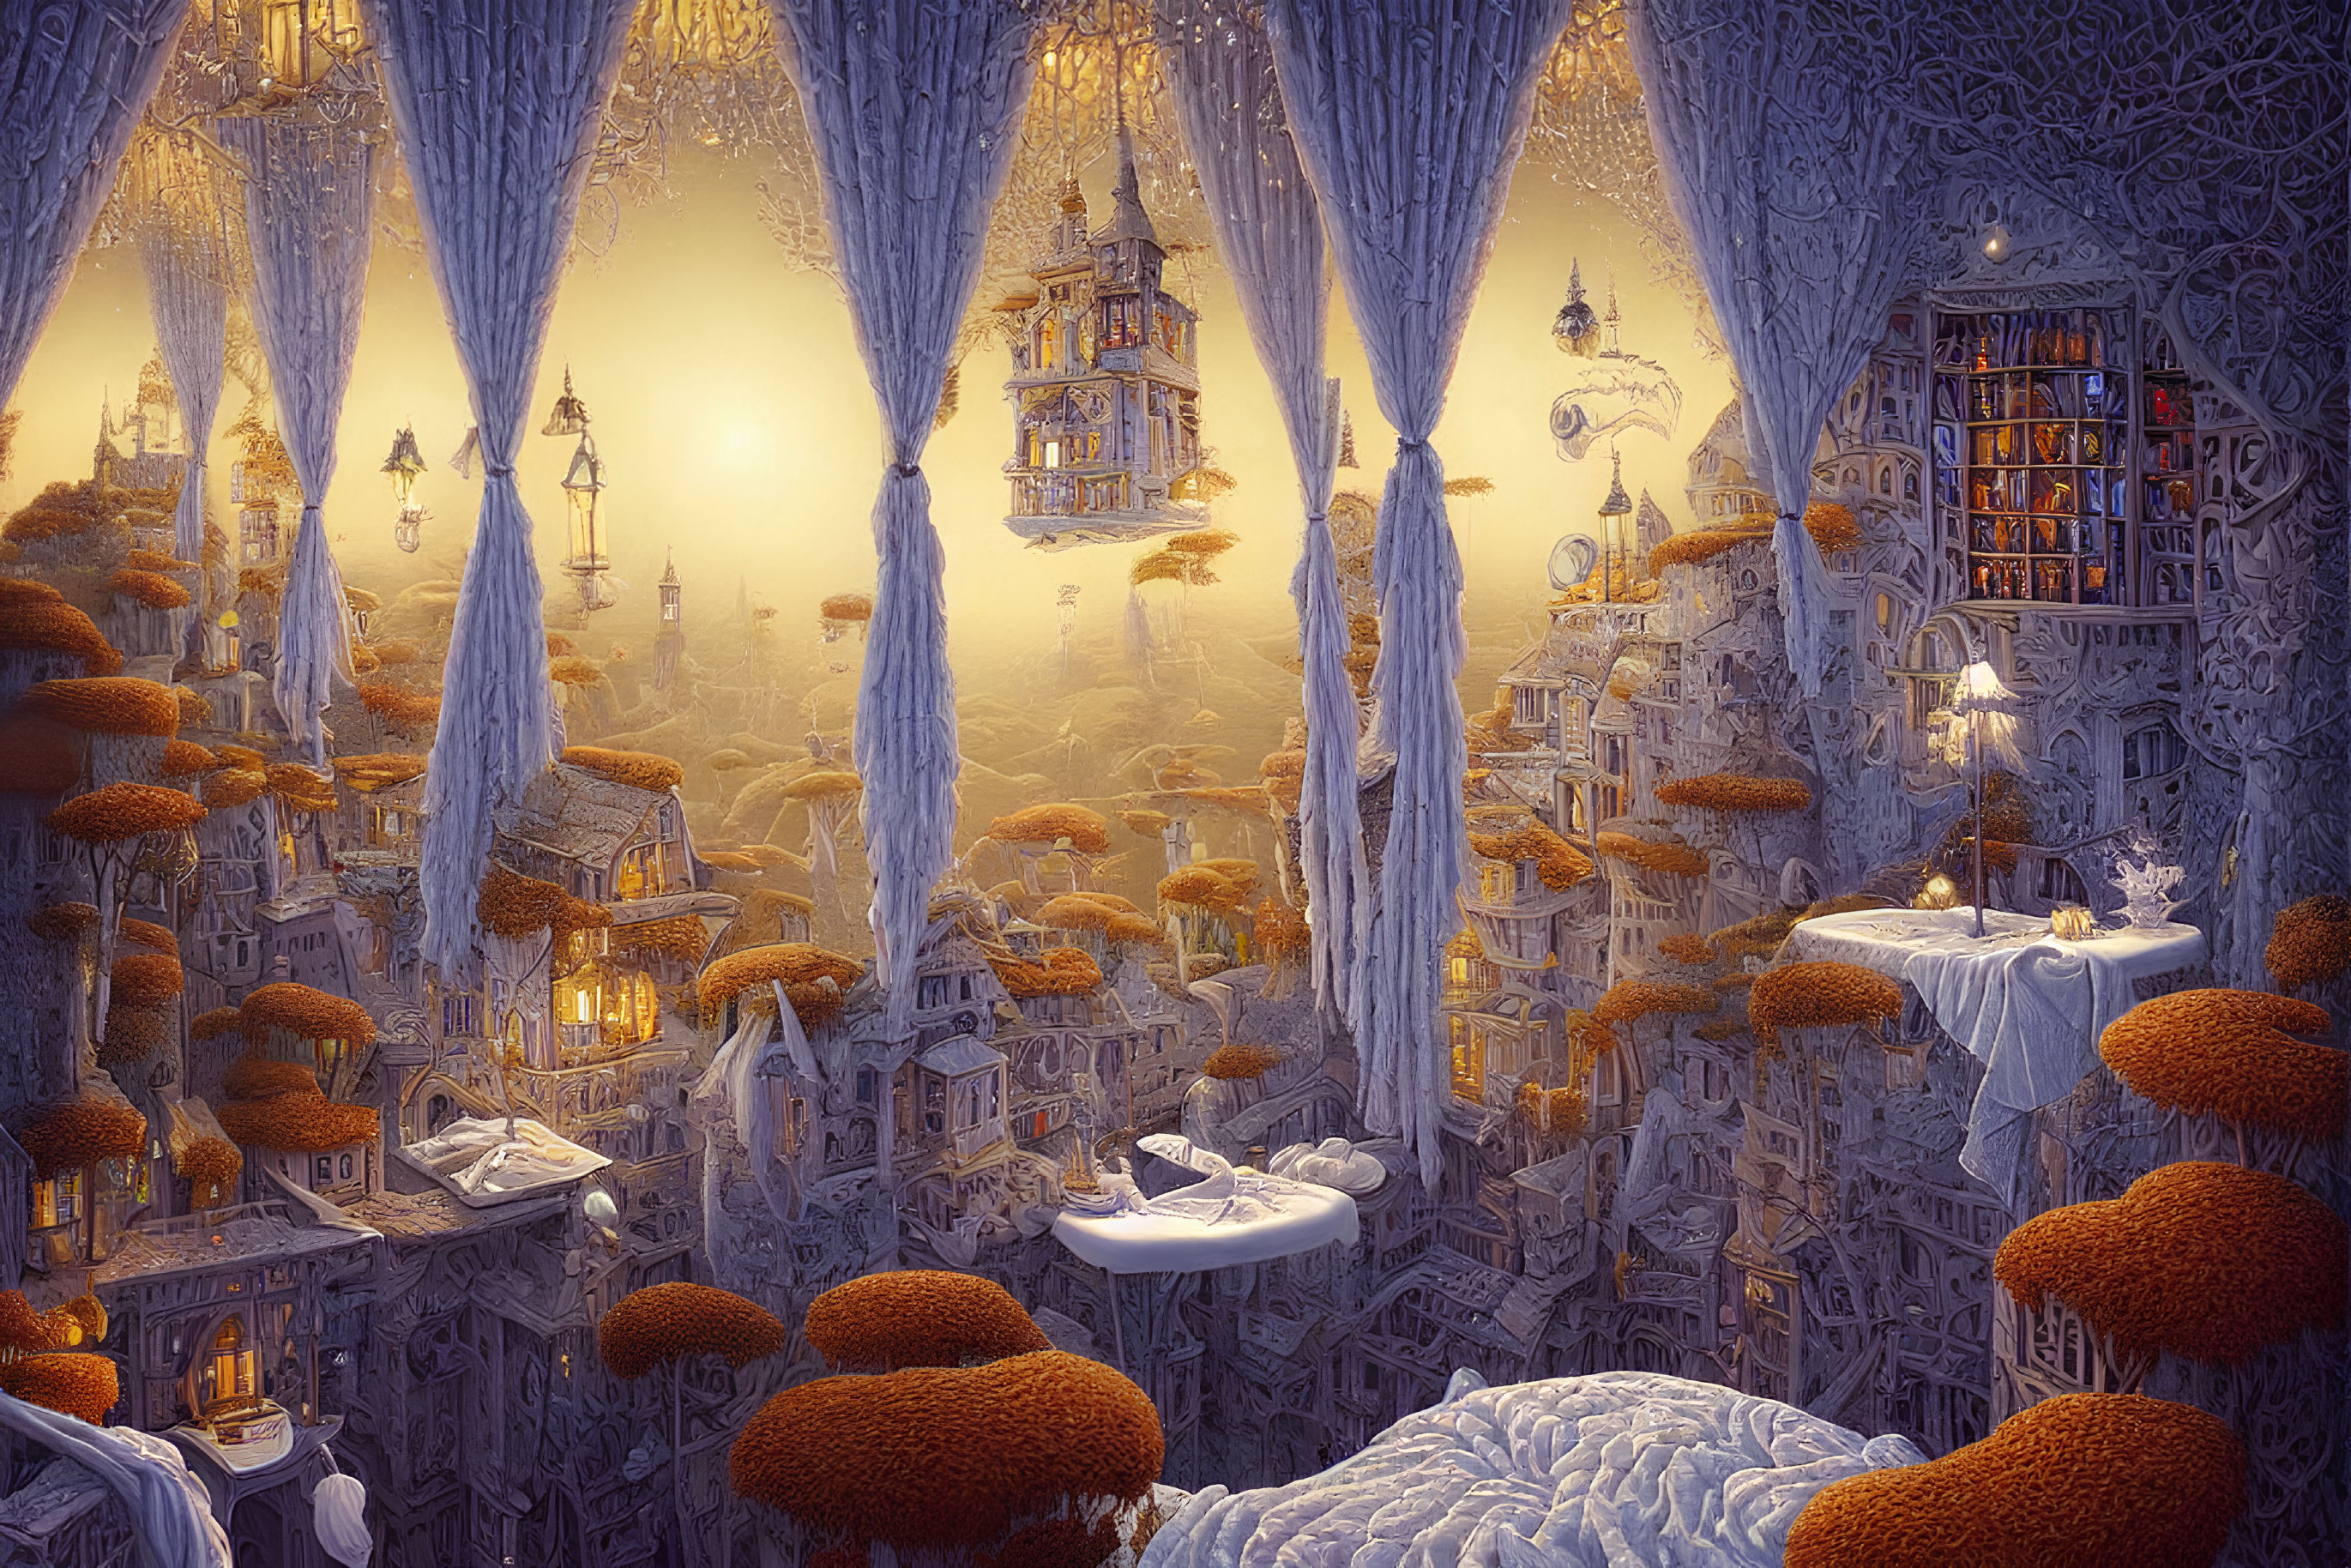 Fantasy landscape with mushroom-like trees, floating islands, detailed architecture, glowing lights, and intricate patterns